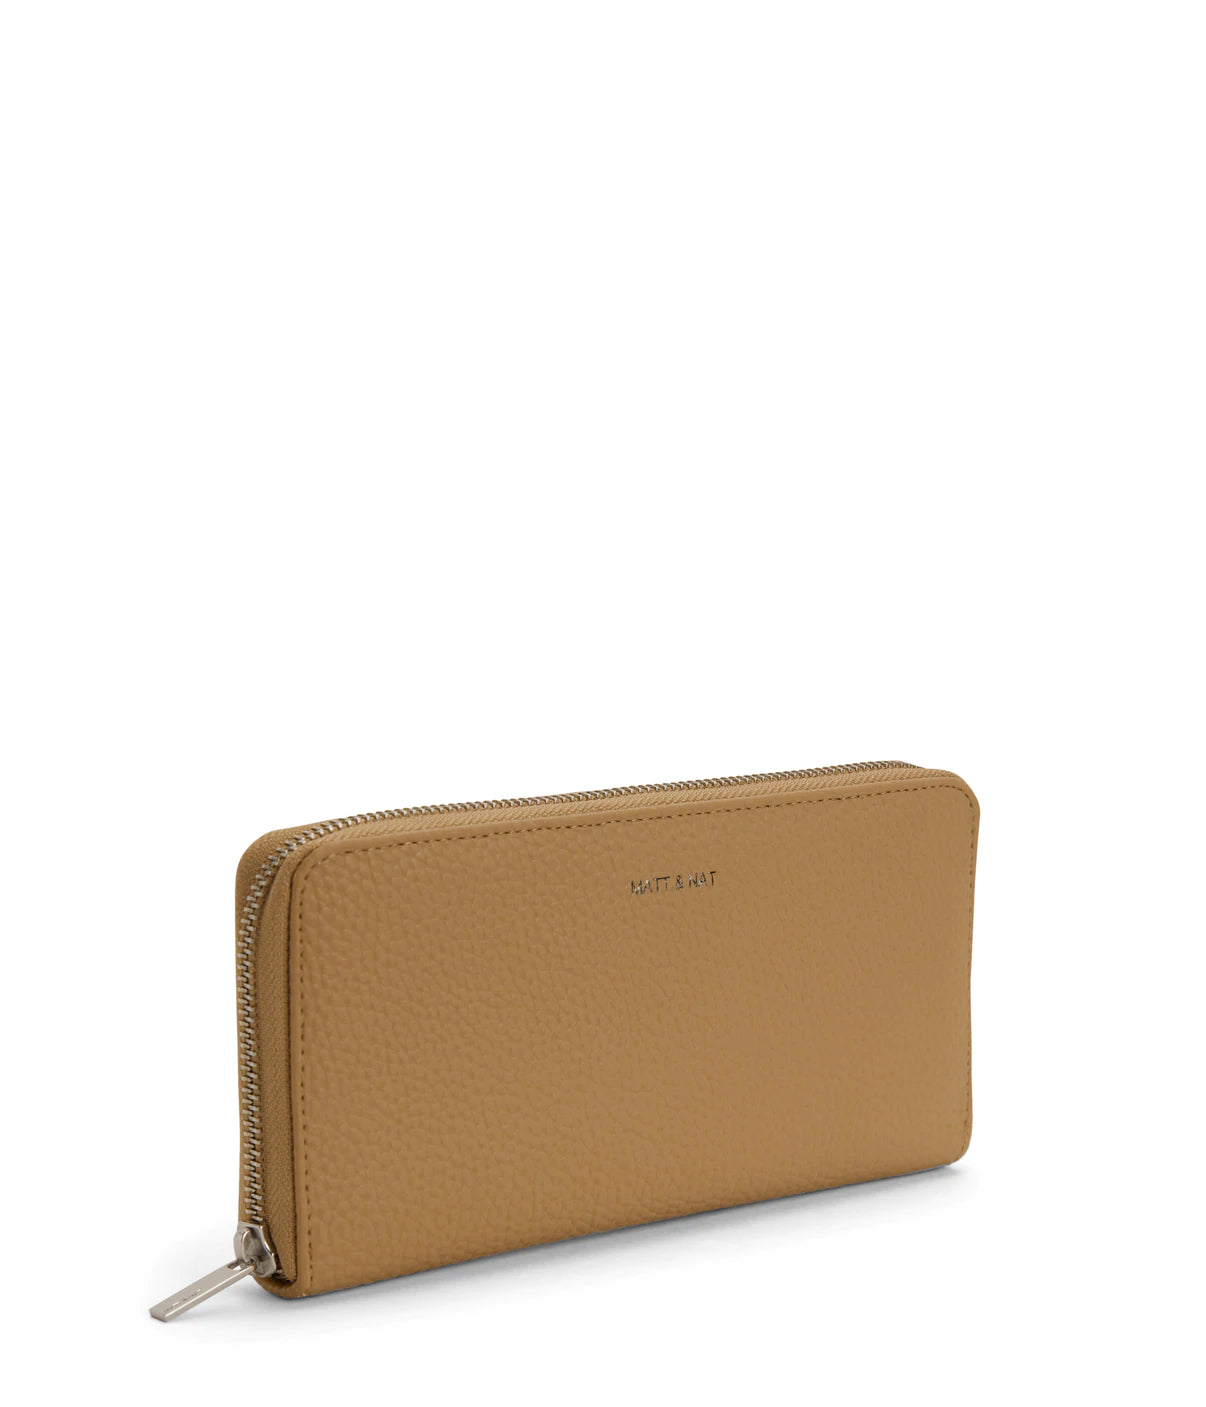 Central Purity Wallet - Scone